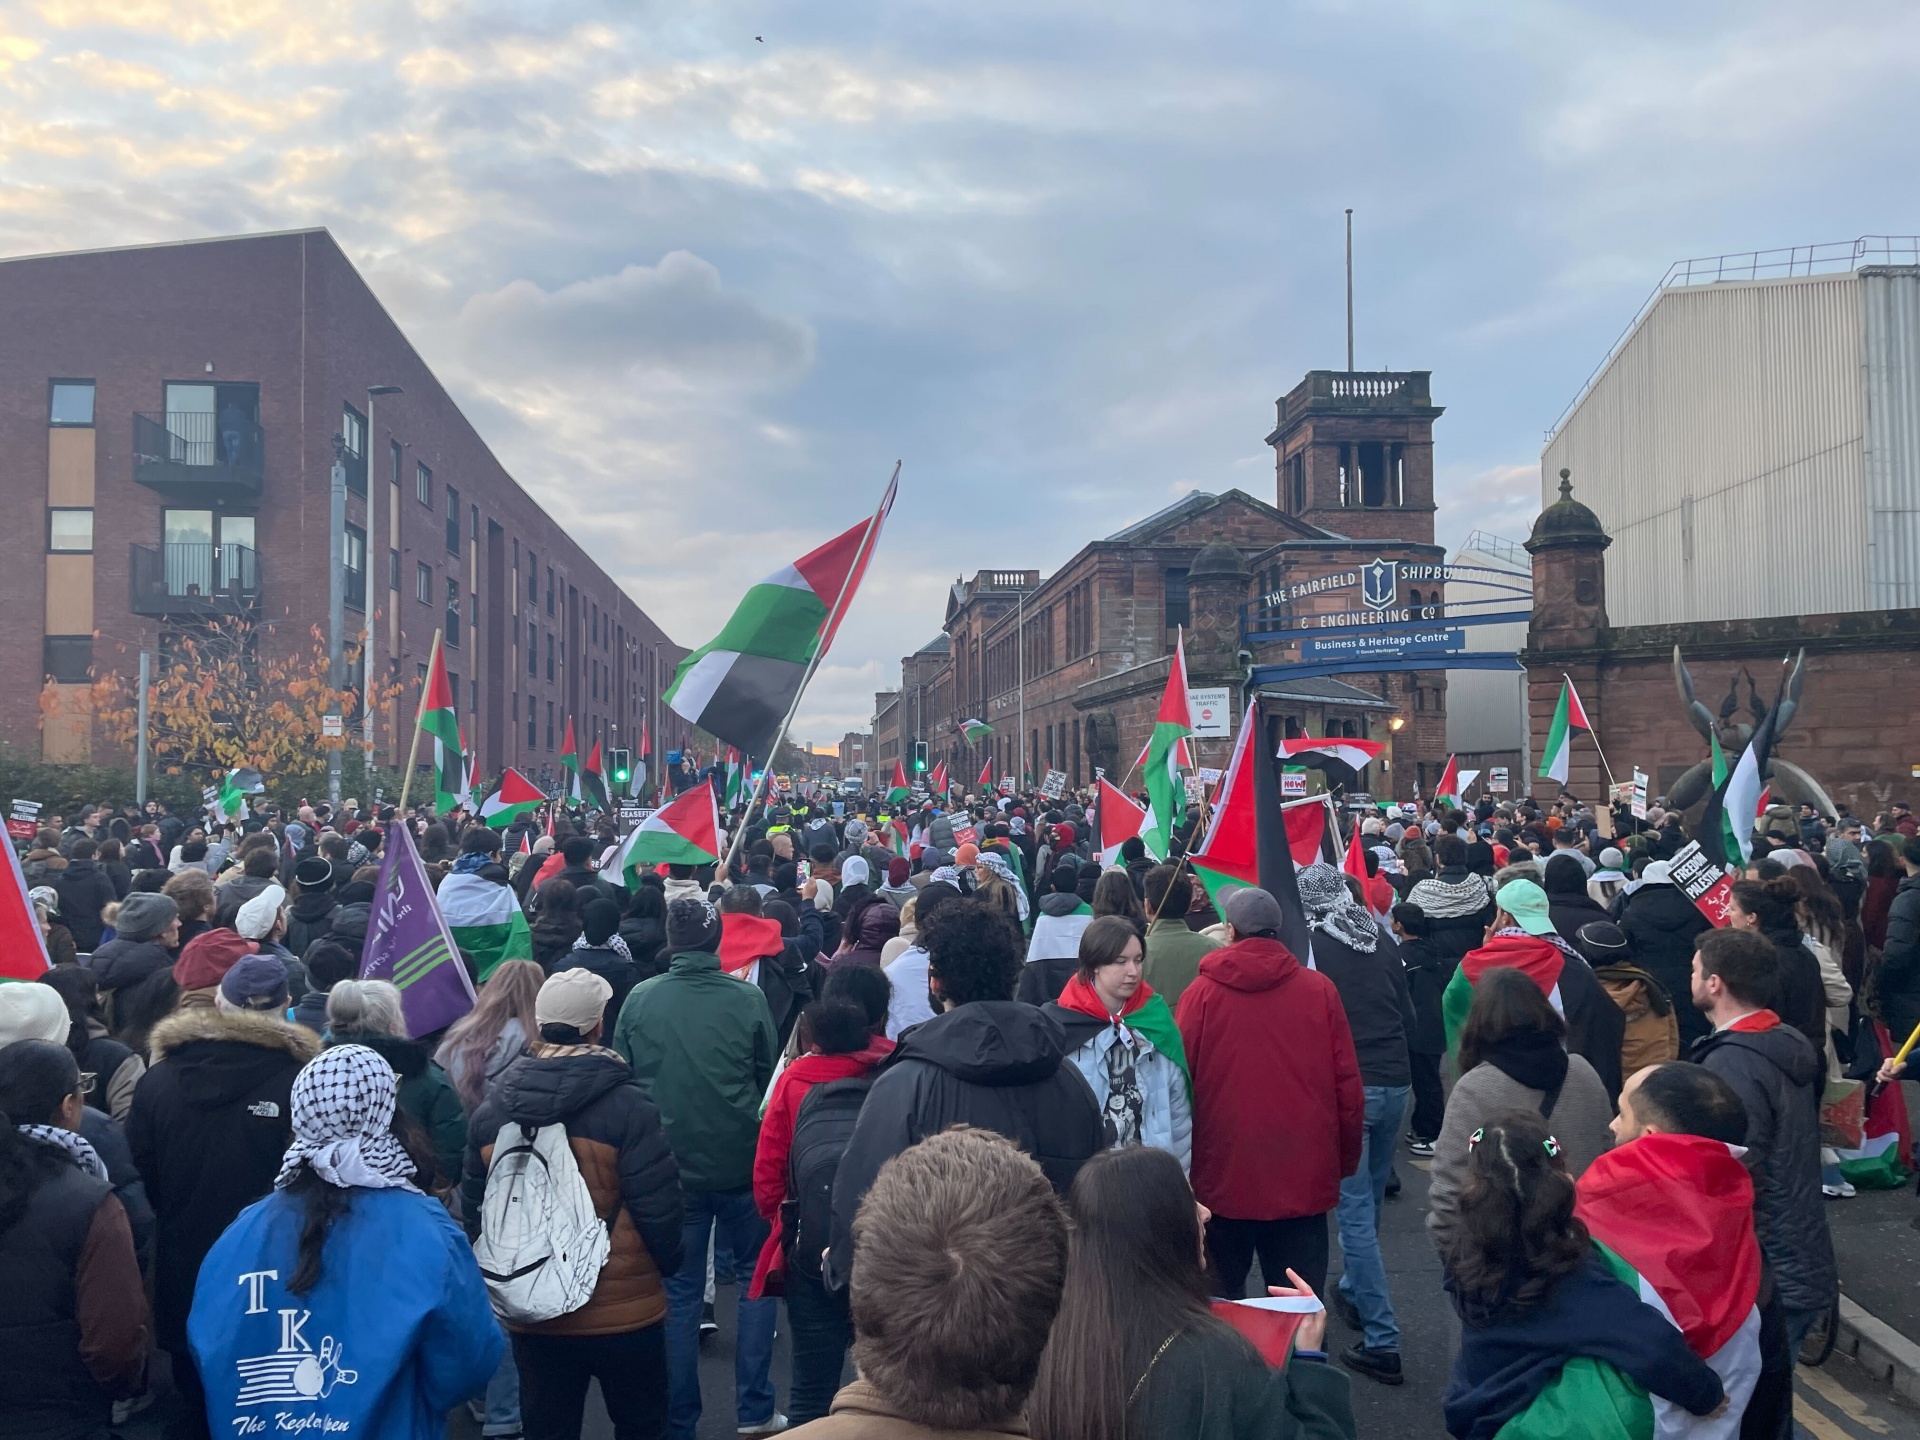 Protesters march through Glasgow